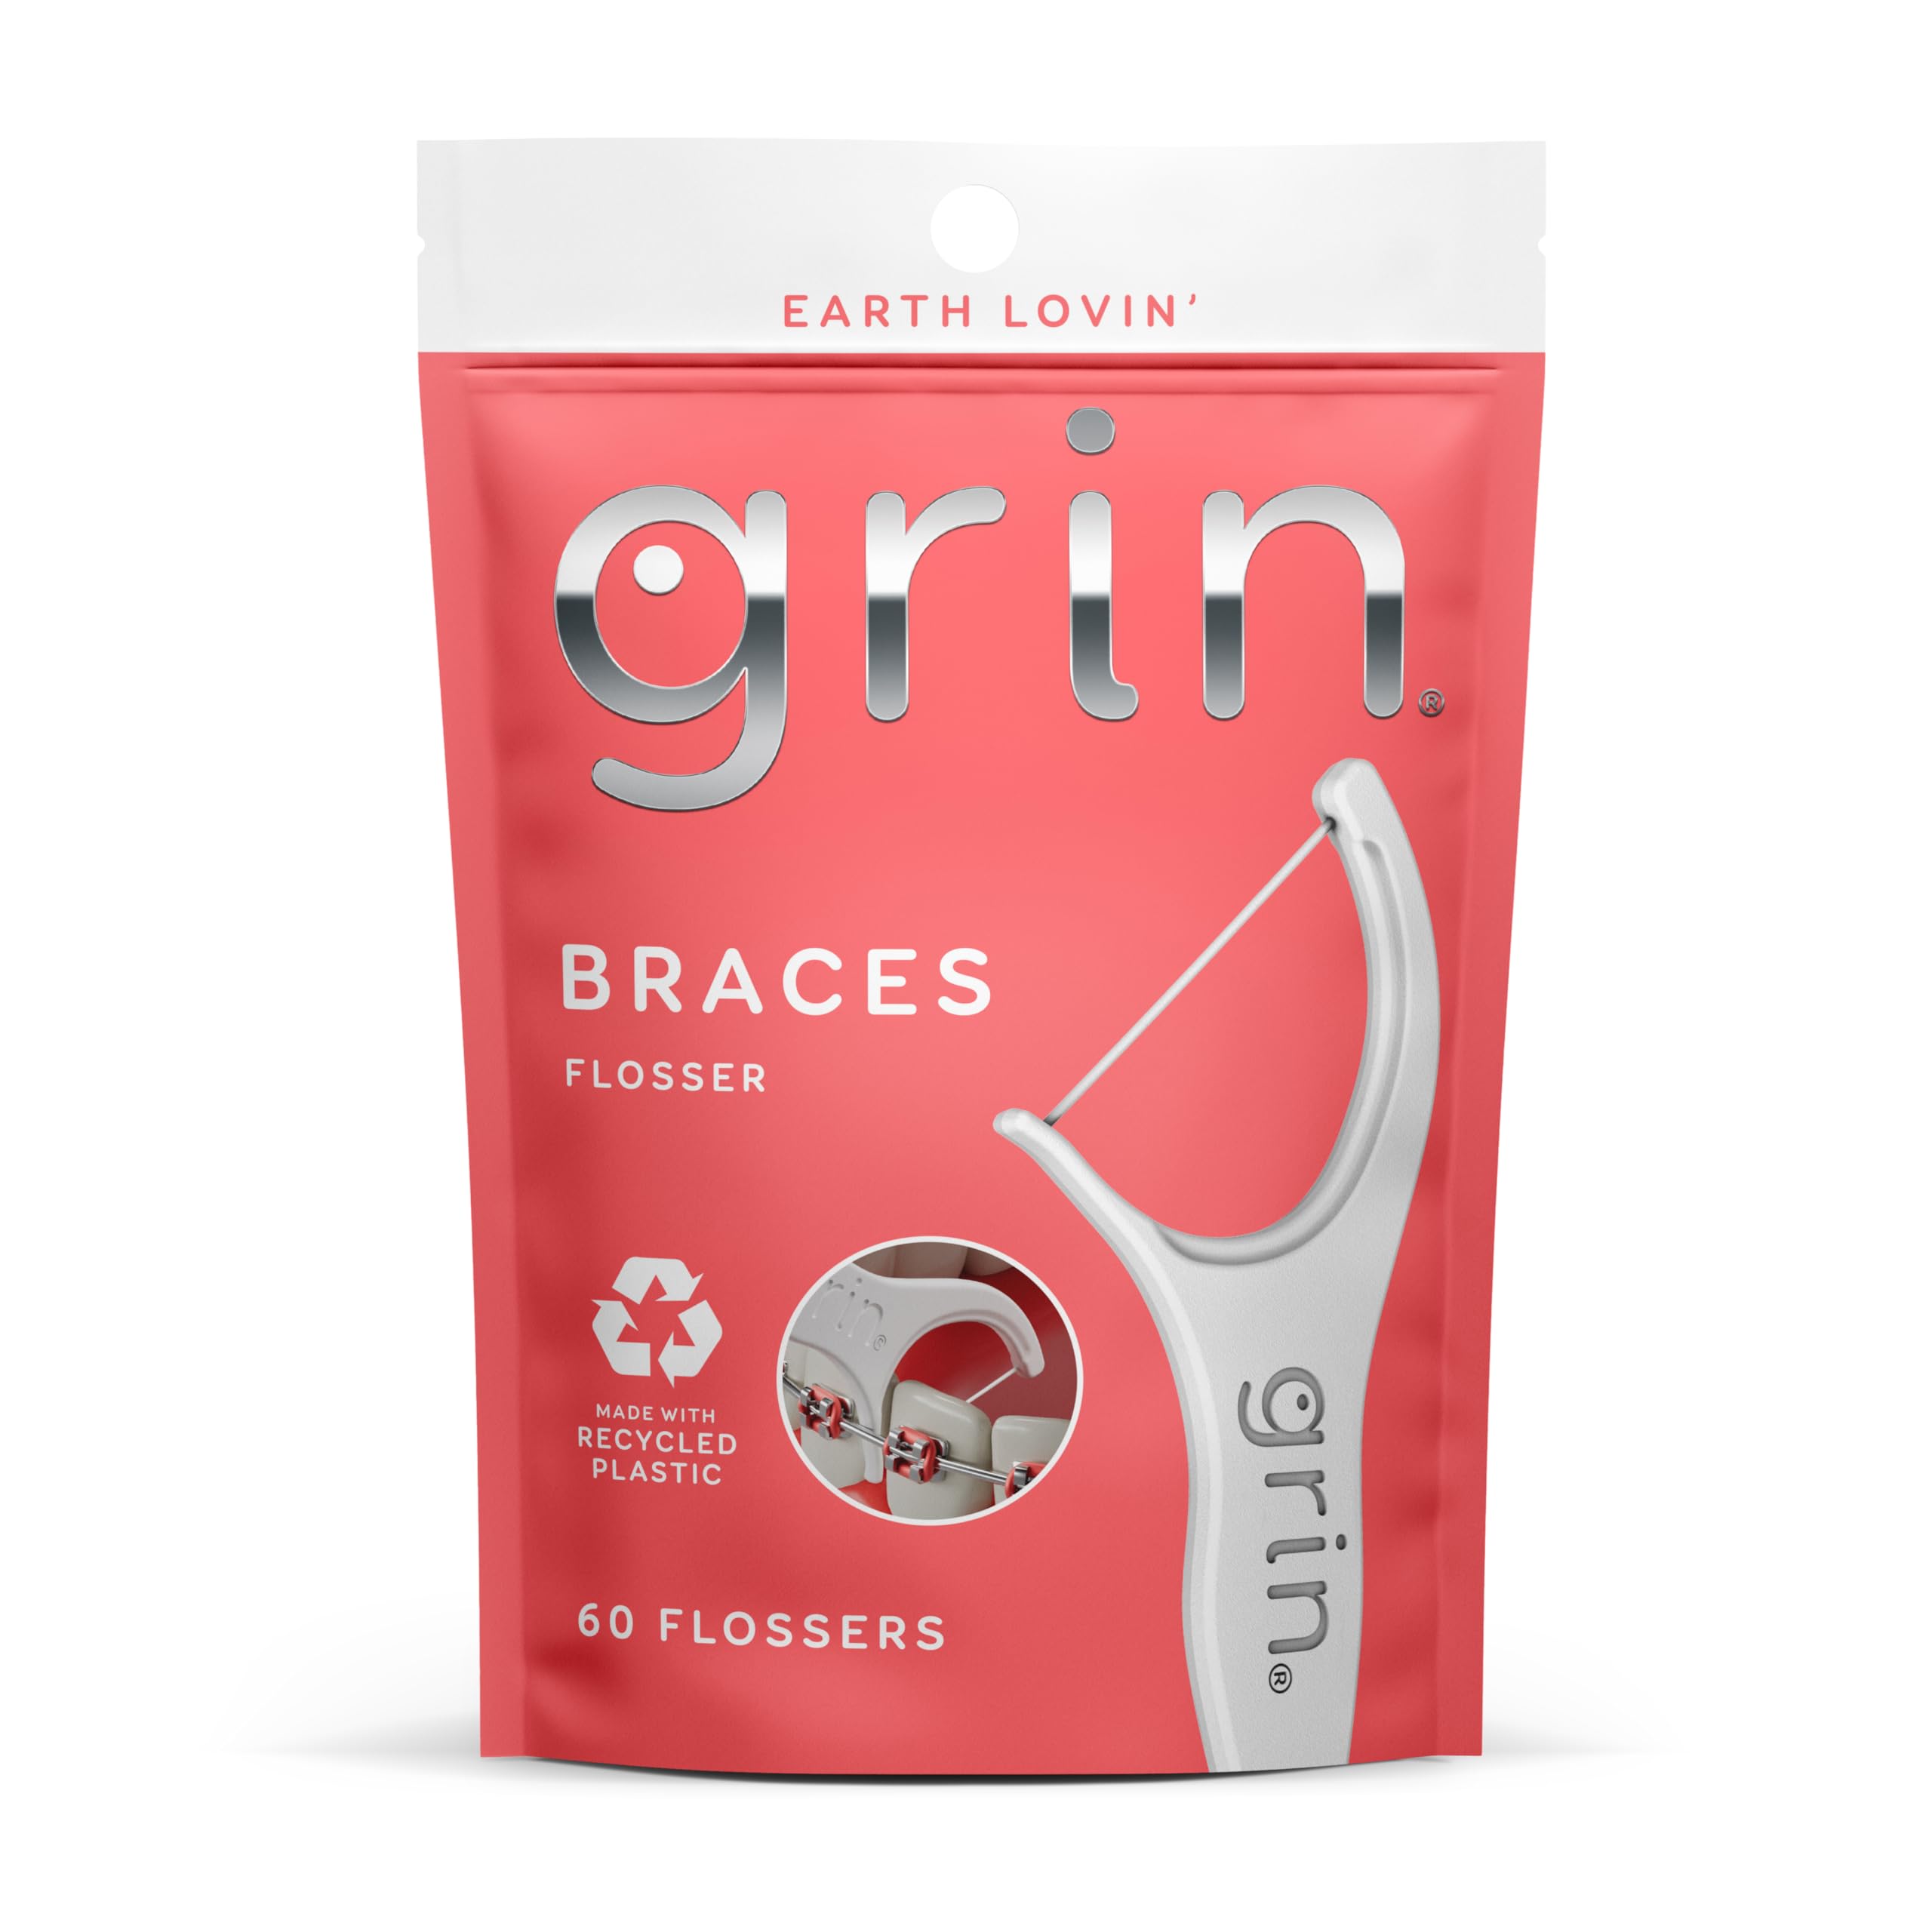 GRIN Braces Flosspyx, Floss Picks Designed for Braces, 60 Count, Dental Flossers, Recycled Plastic, Ortho Approved, Premium Thin Floss, Includes Handy Wax Scraper and Pick